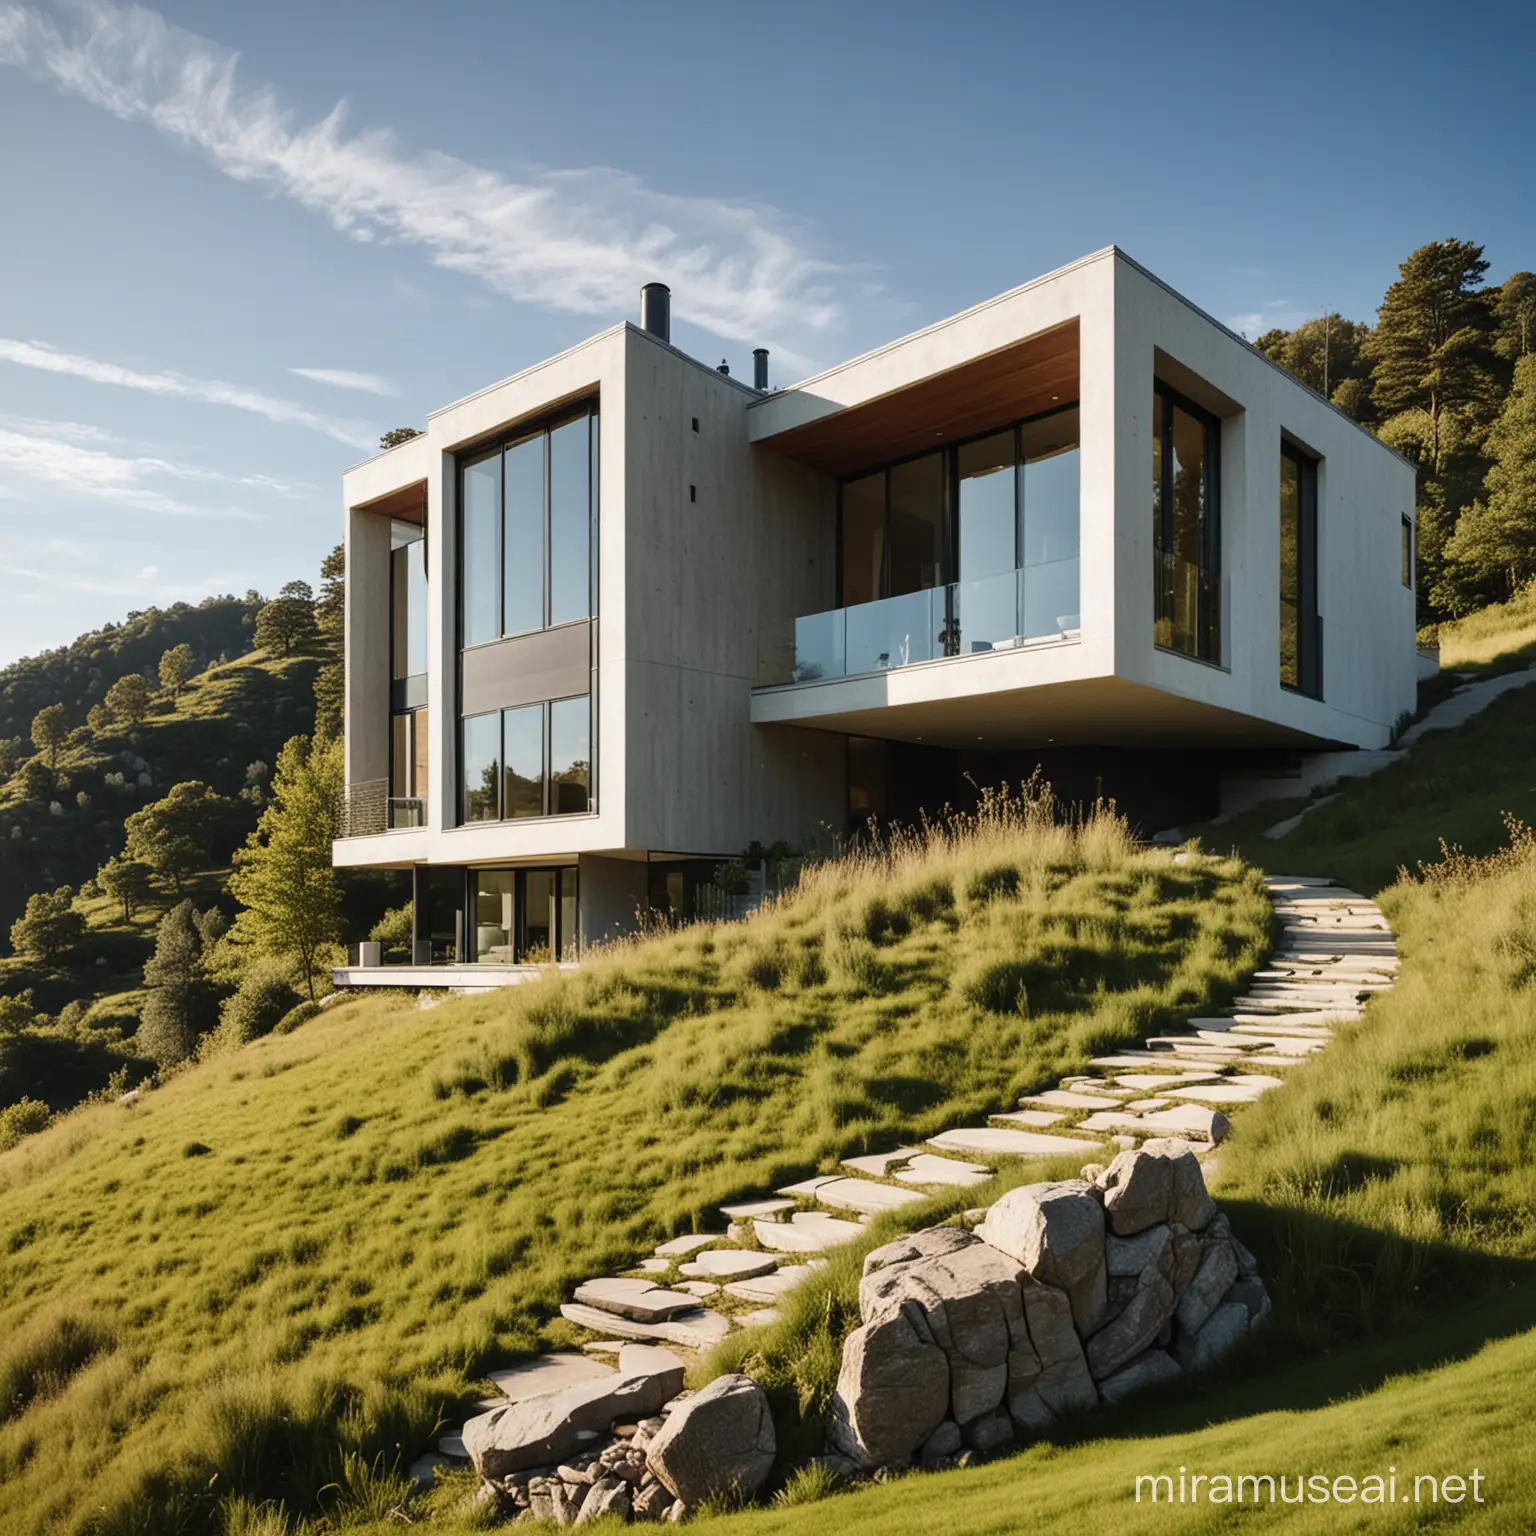 A beautiful modern home sitting on a sunny hill